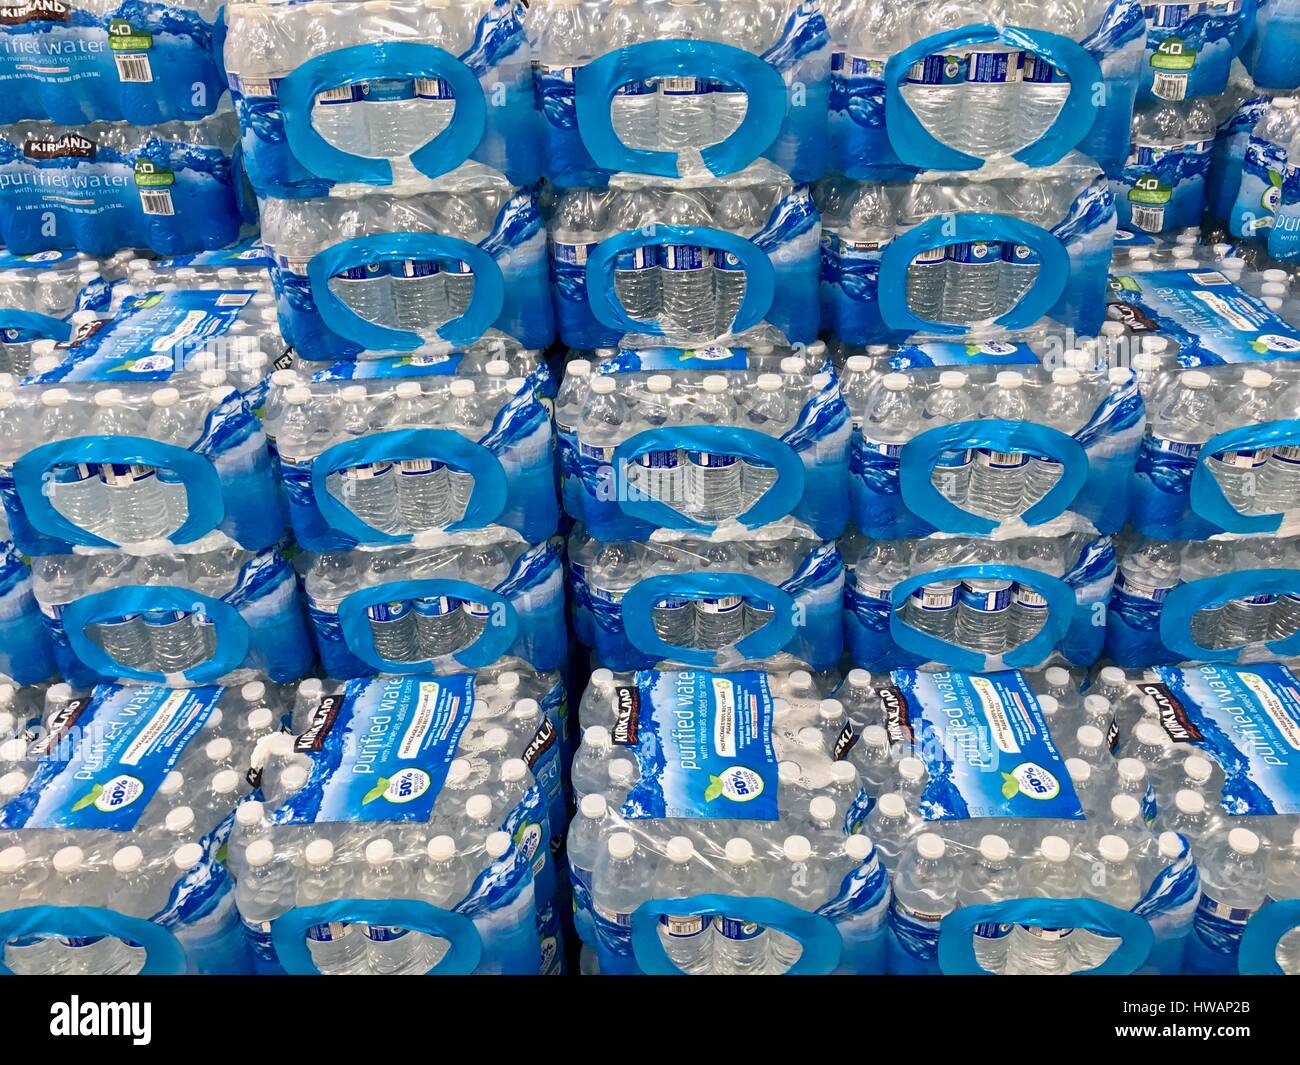 cases-of-water-bottles-at-costco-stock-photo-alamy